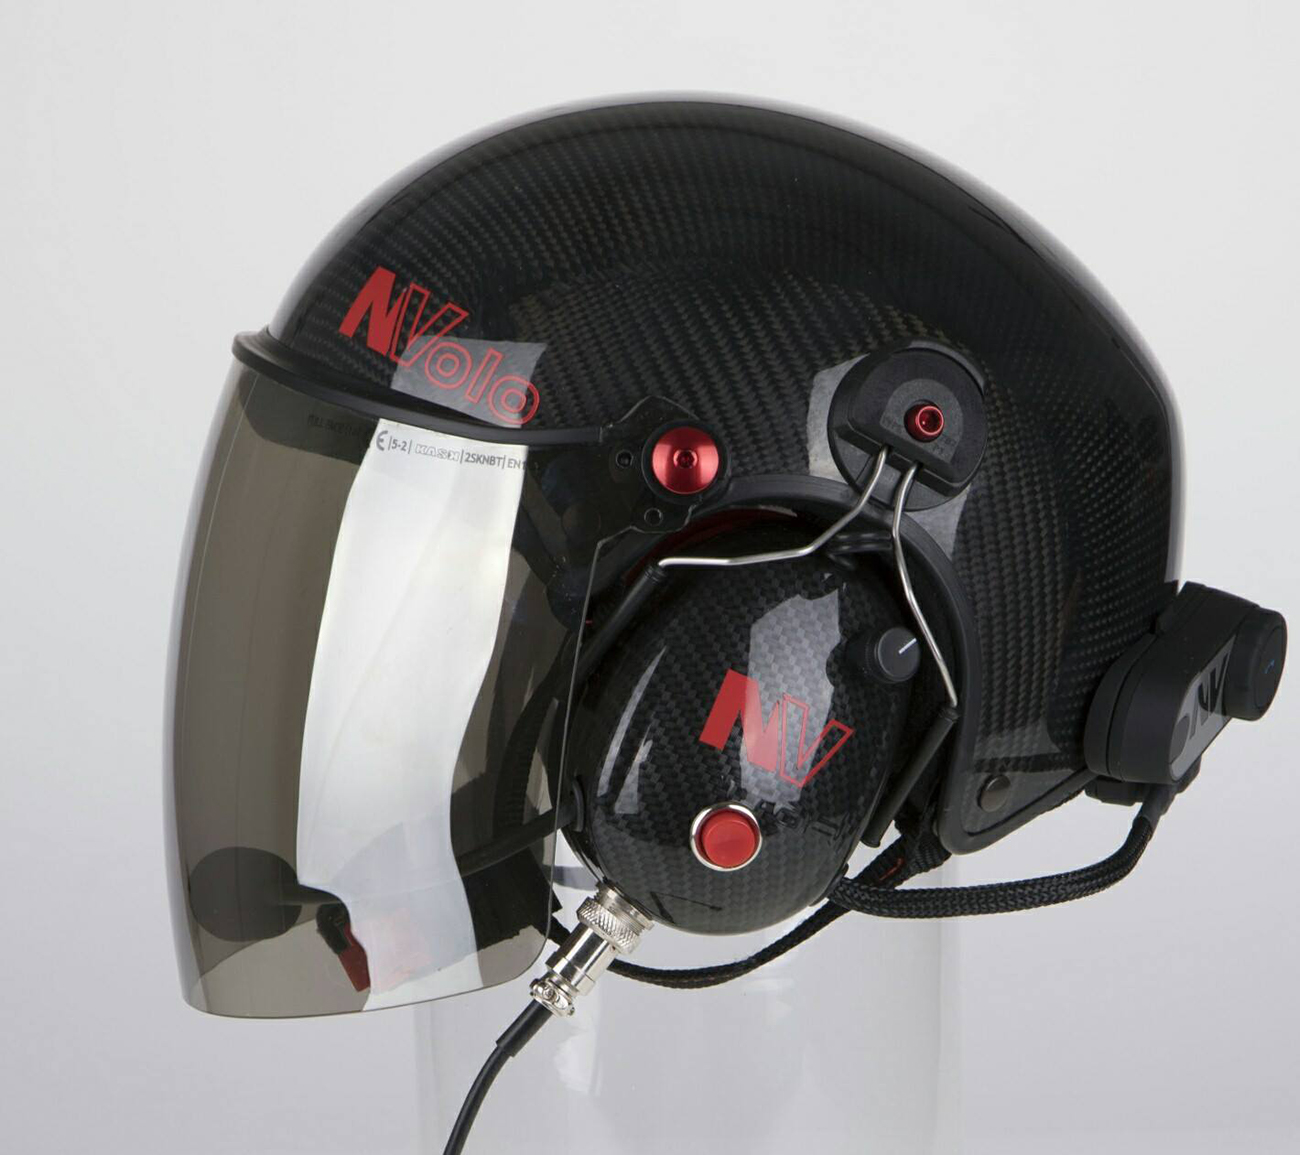 Helmet with communication system for Paramotor Pilots